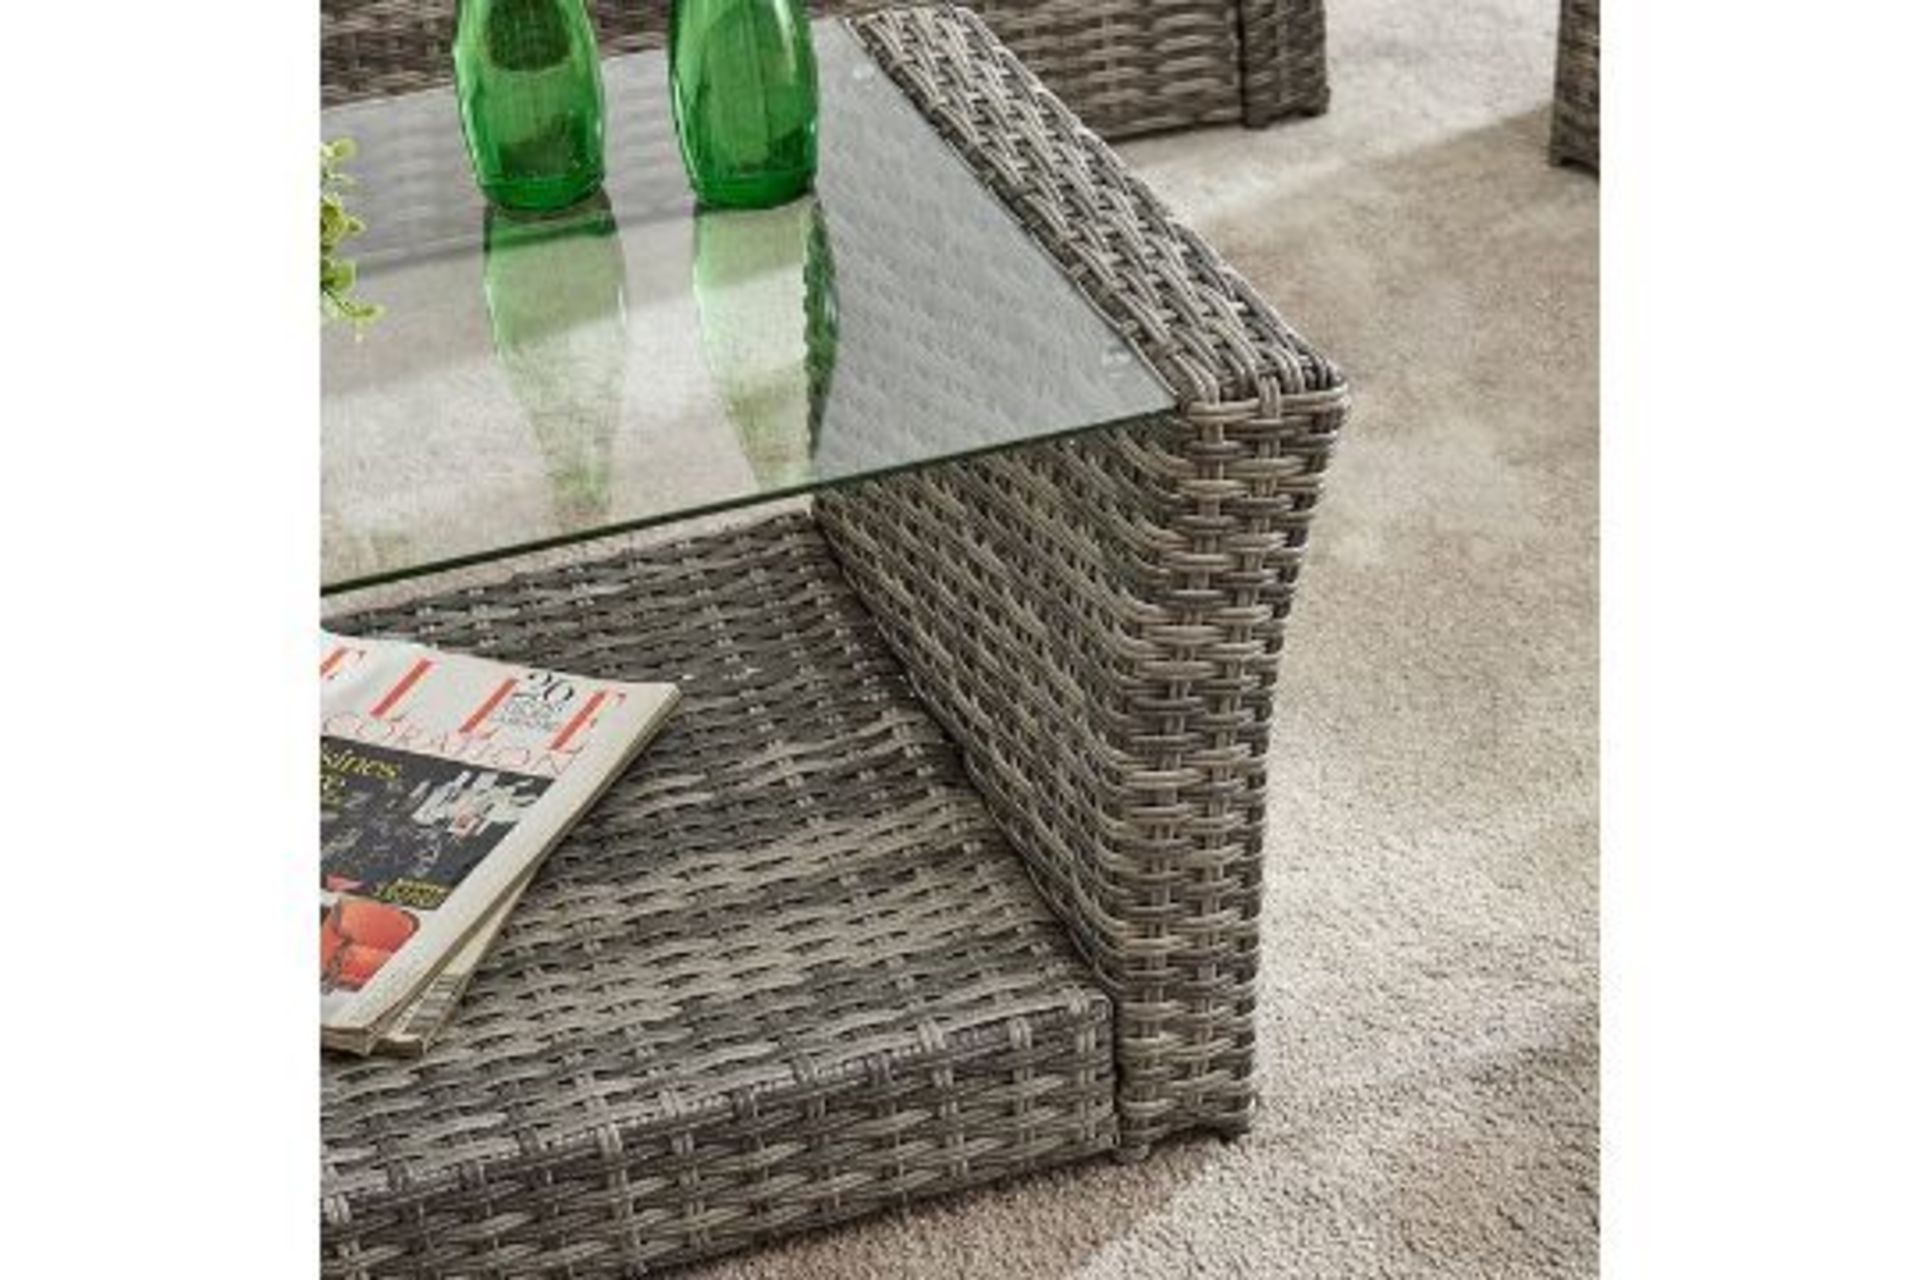 New Boxed Corfo 4 Seater Garden Furniture Set in Grey. The 4-piece garden furniture set includes a - Image 2 of 4